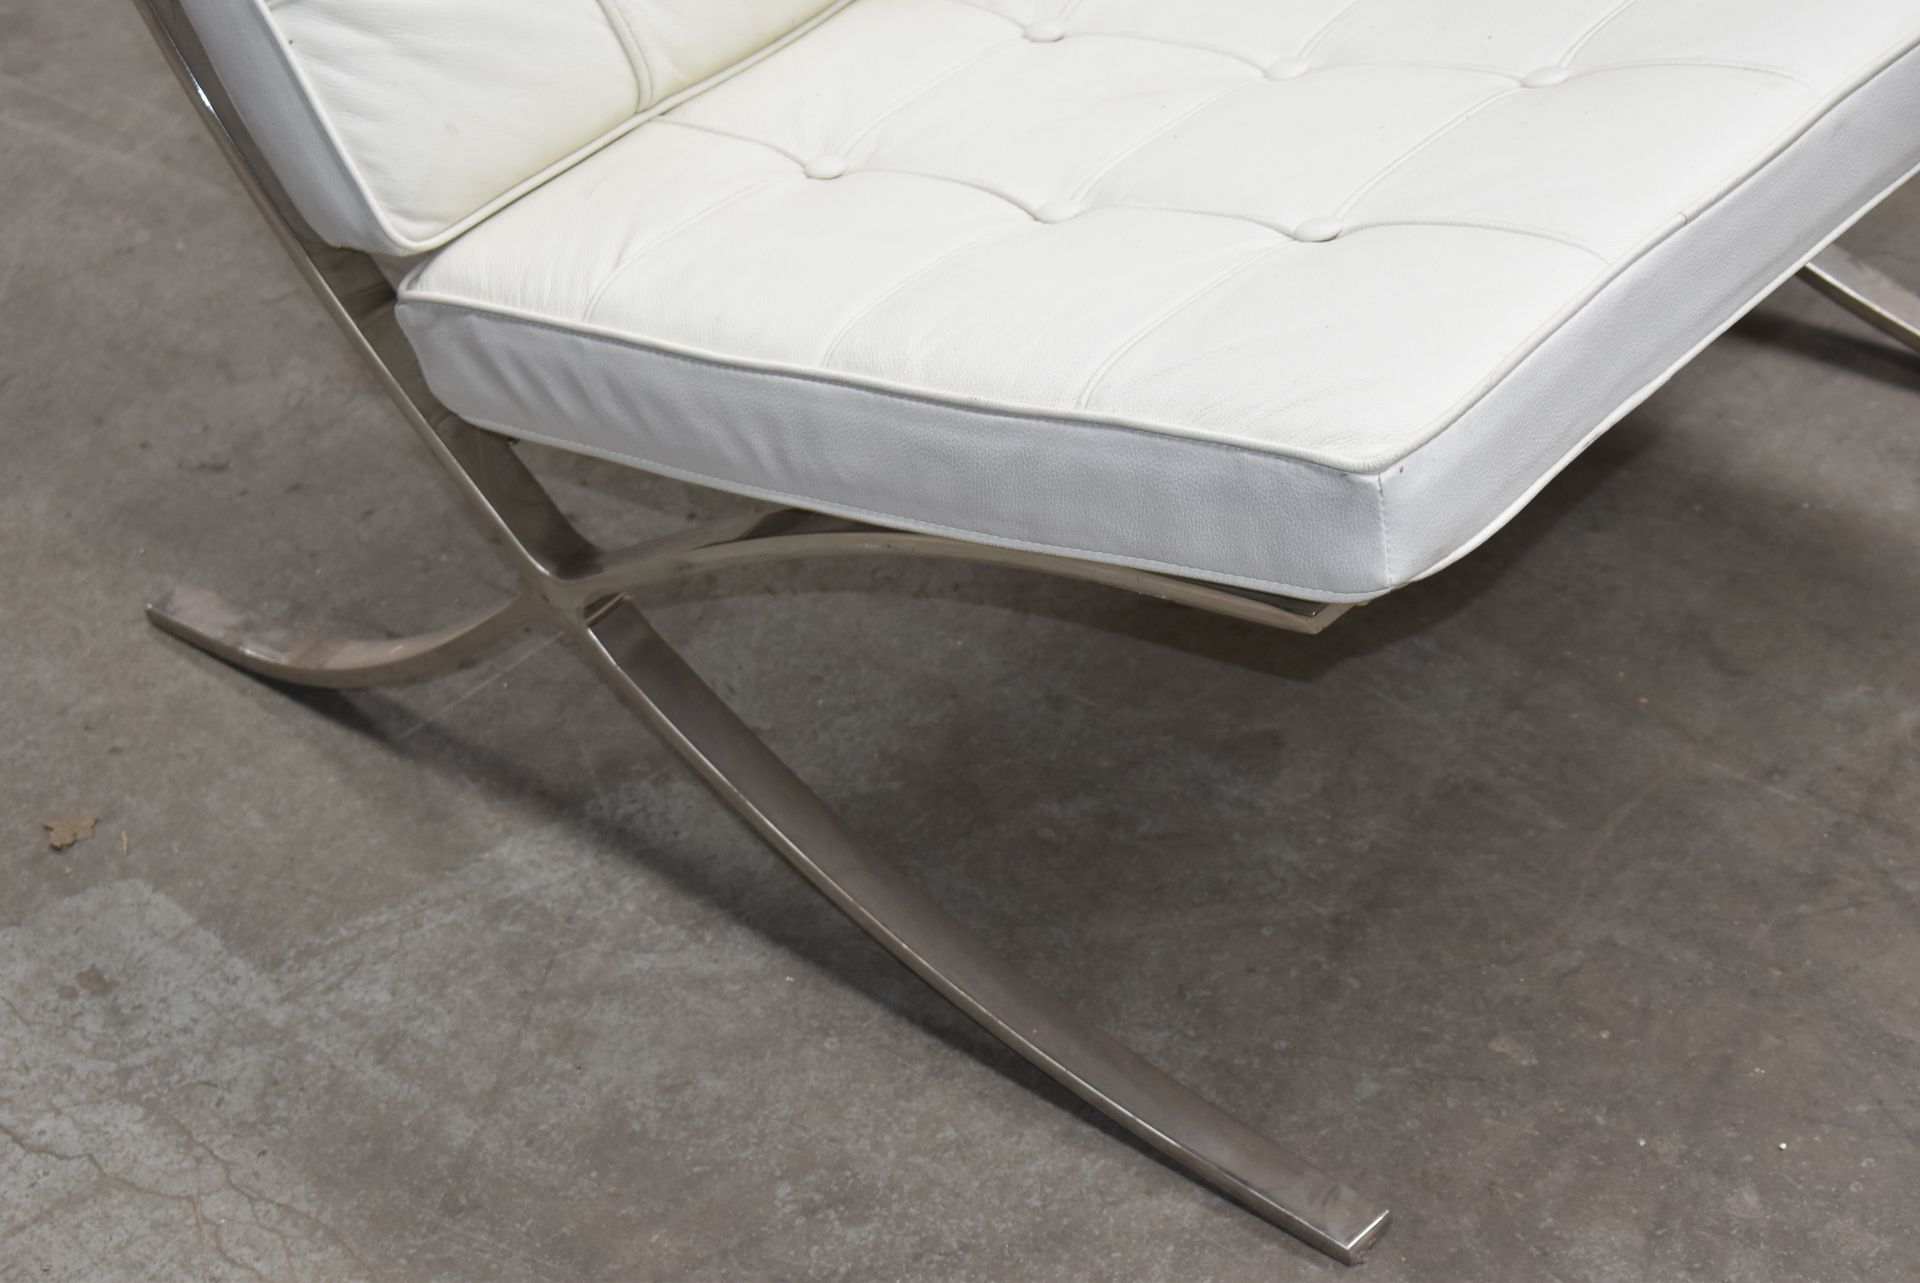 1 x Contemporary Lounge Chair With Strap Supports, Chrome Base and White Leather Studded Seat and - Image 7 of 9